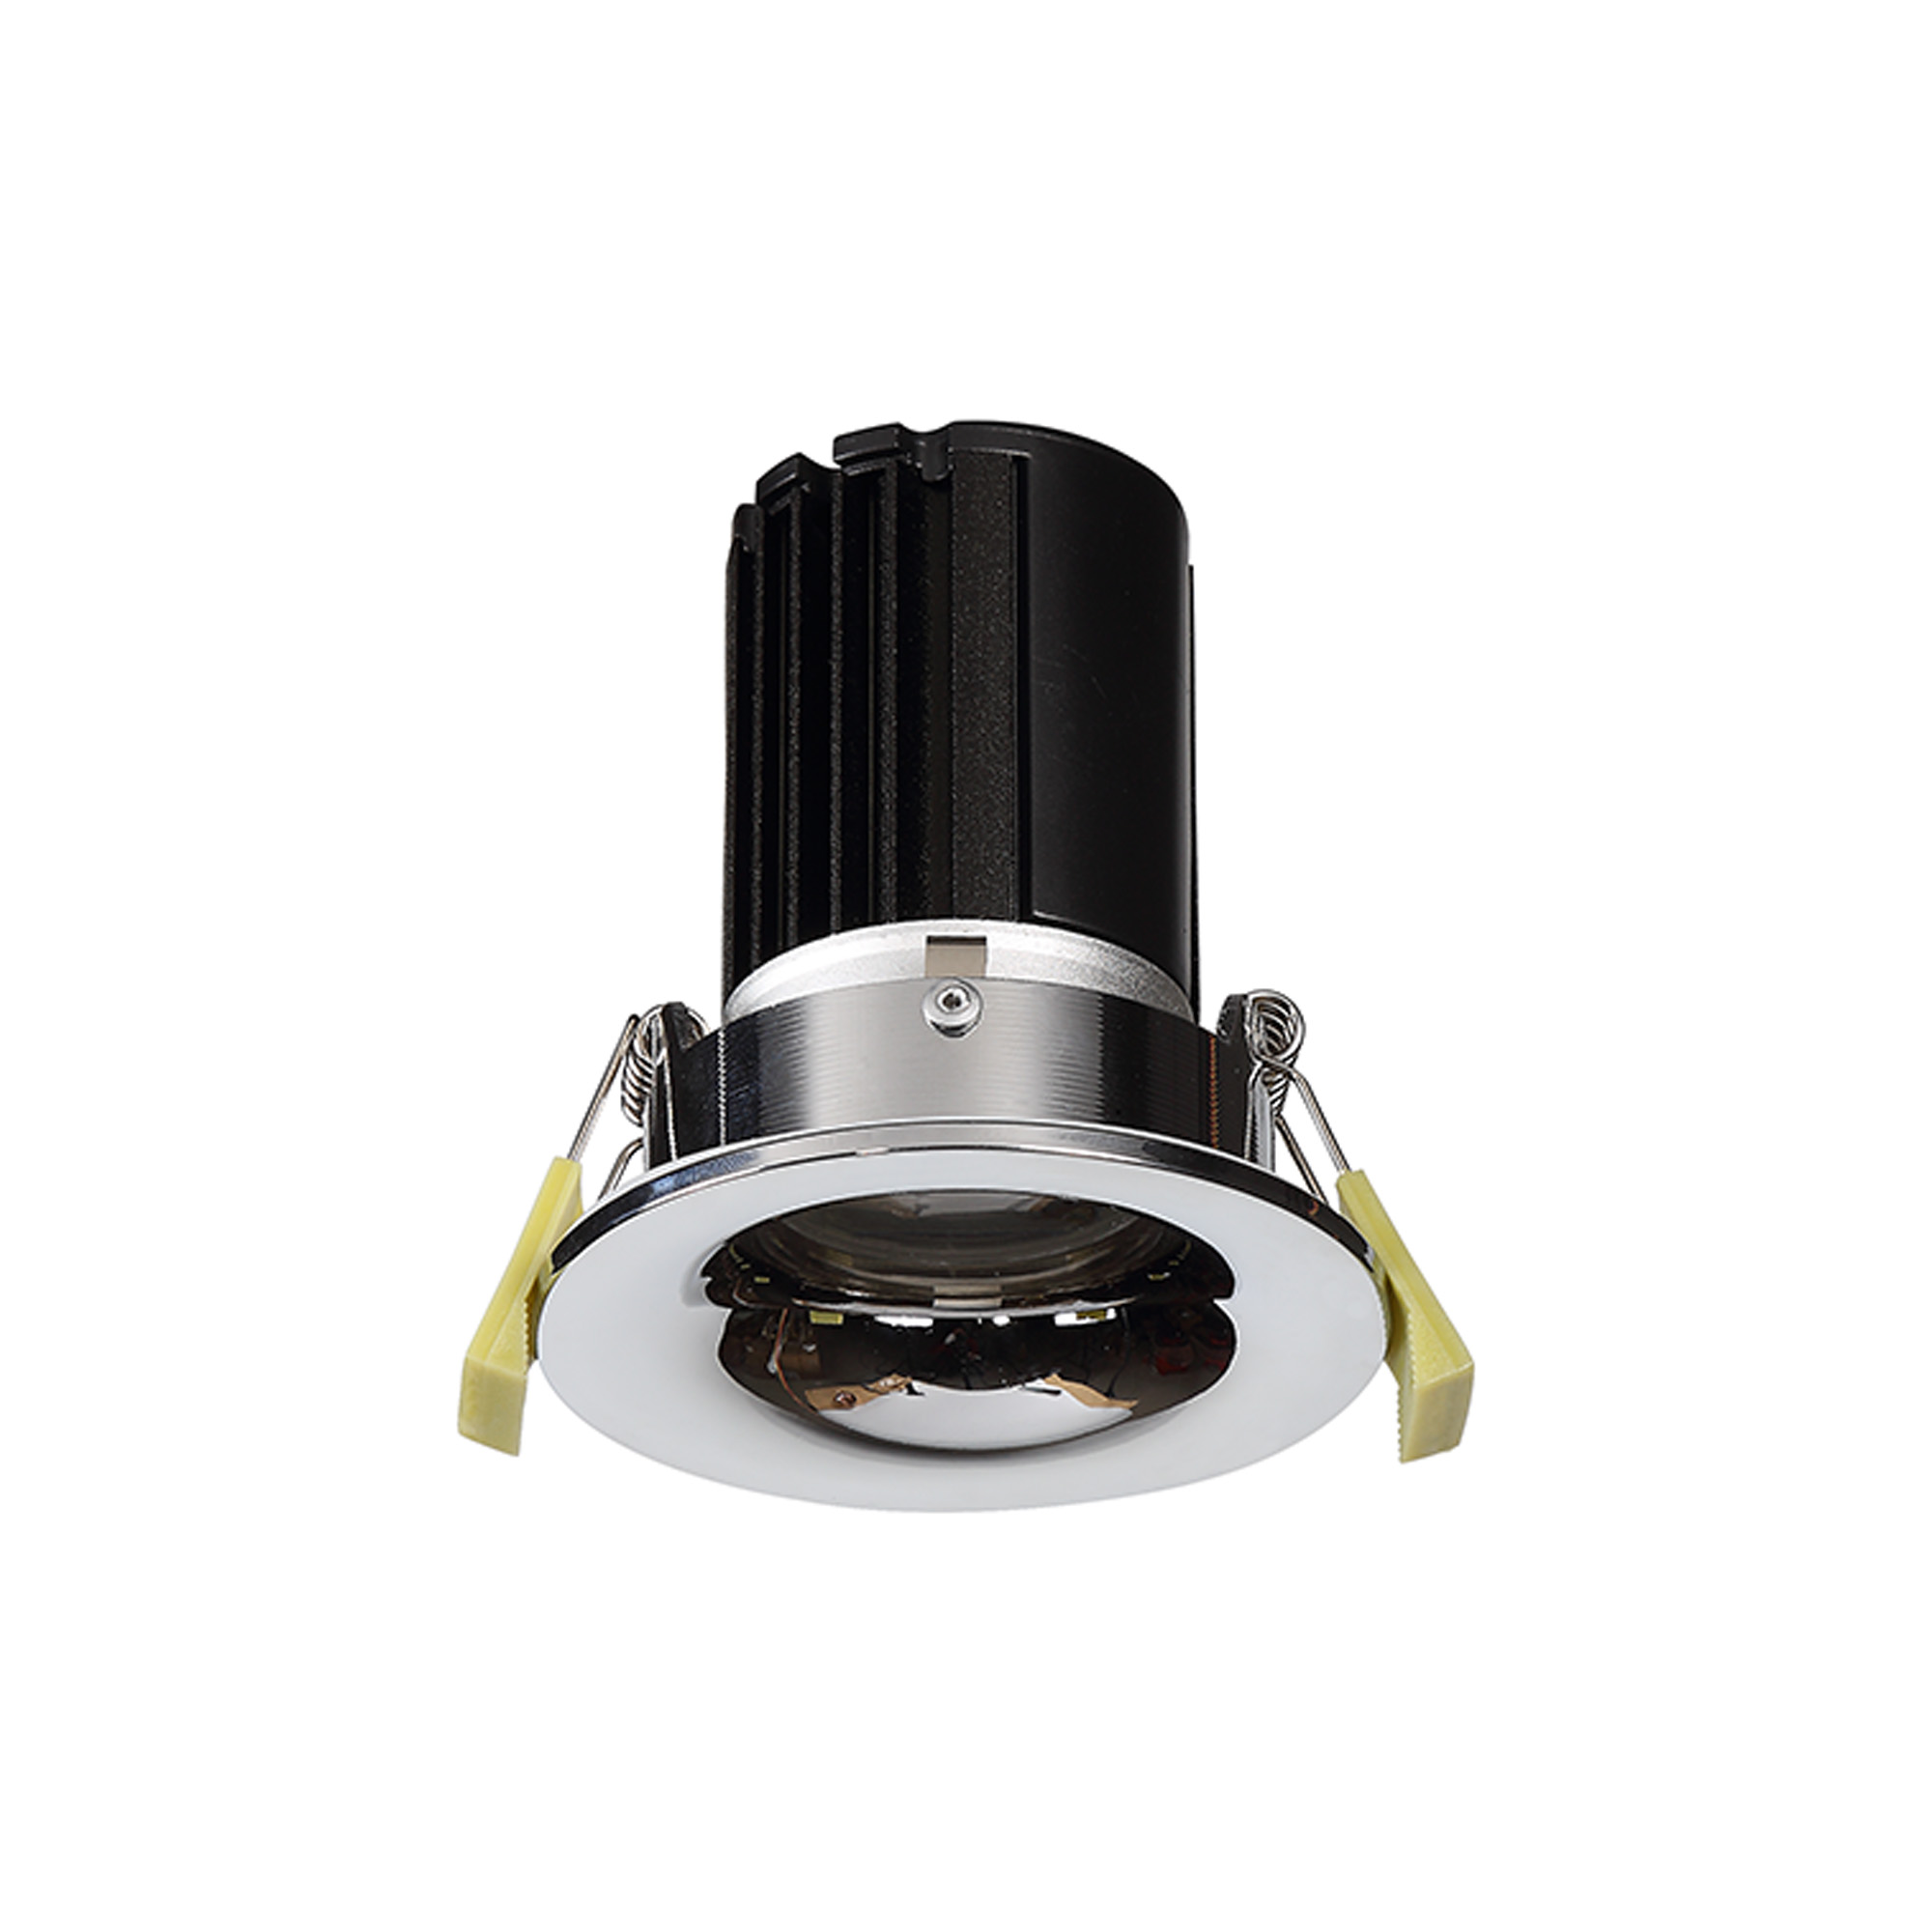 DM201538  Bruve 12 Tridonic powered 12W 2700K 1200lm 12° LED Engine;350mA ; CRI>90 LED Engine Polished Chrome Fixed Round Recessed Downlight; Inner Glass cover; IP65